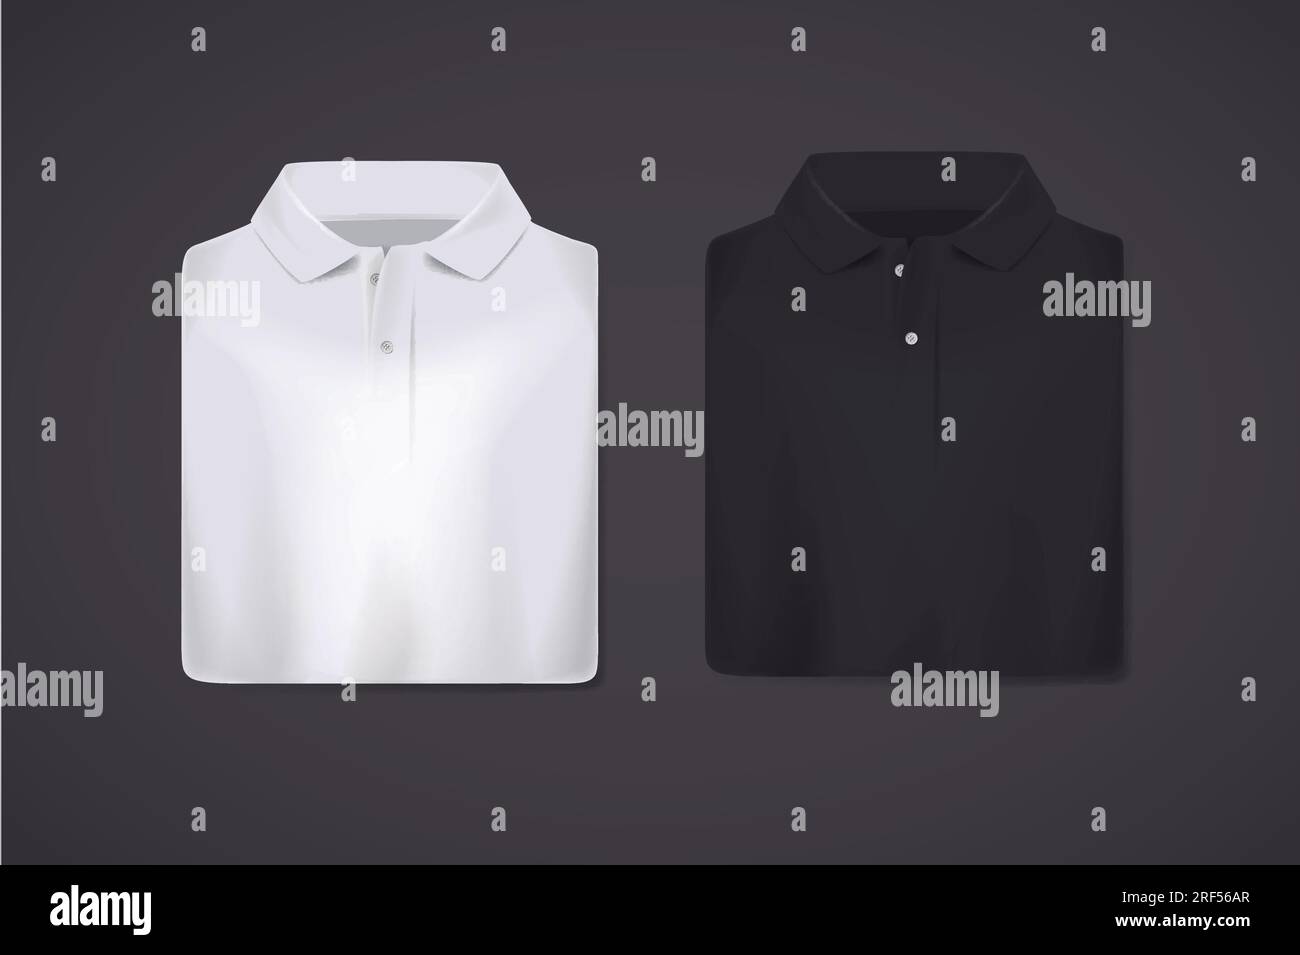 Black and white folded polo shirts mockup isolated. Stock Vector